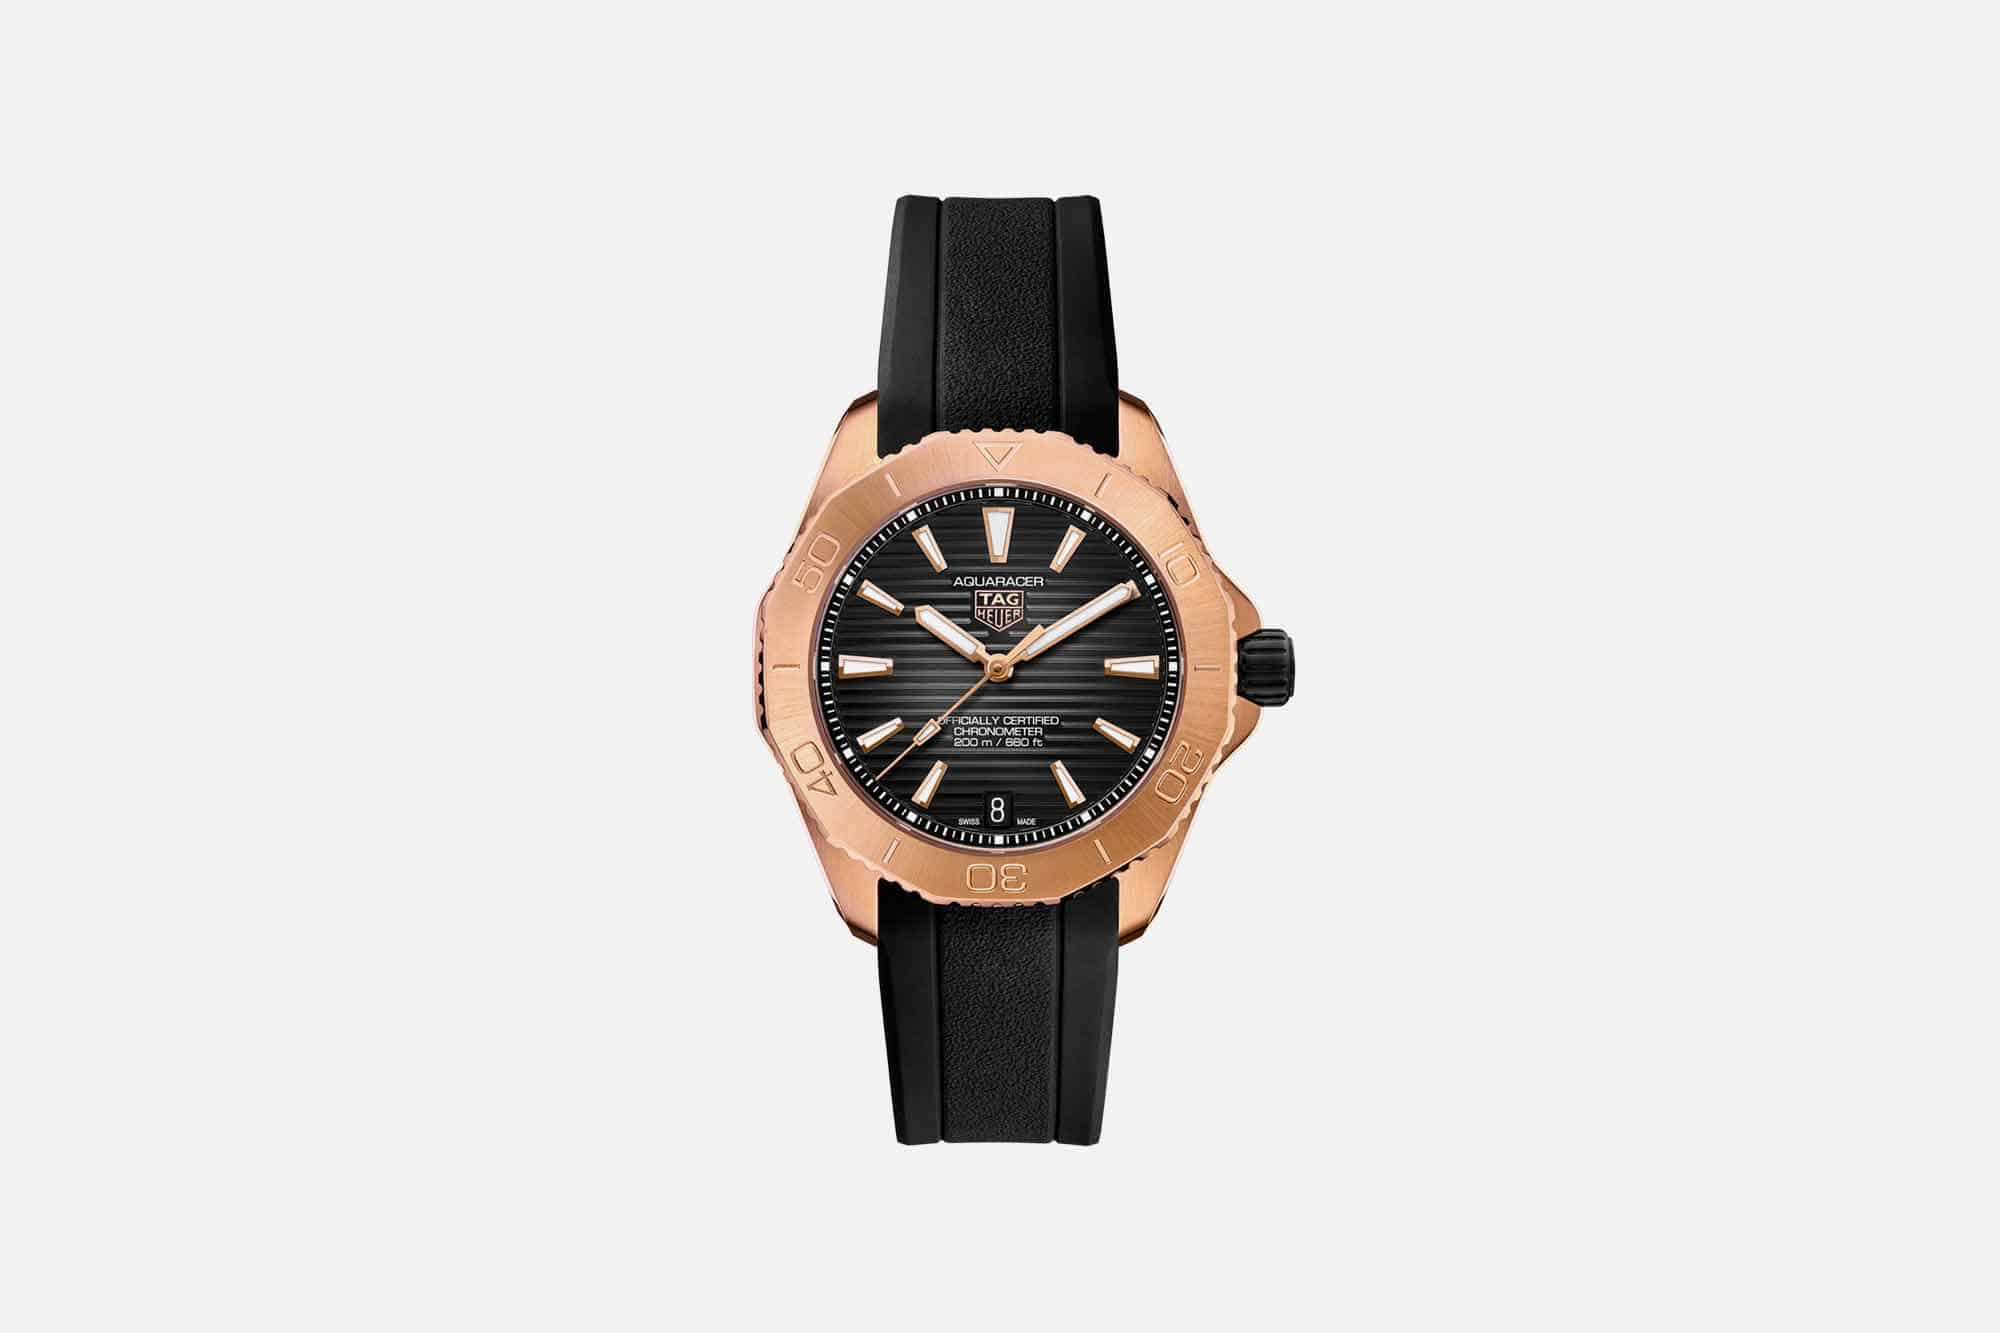 Should this Watch Exist" The Solid Gold Aquaracer is a Surprise Watches & Wonders Highlight